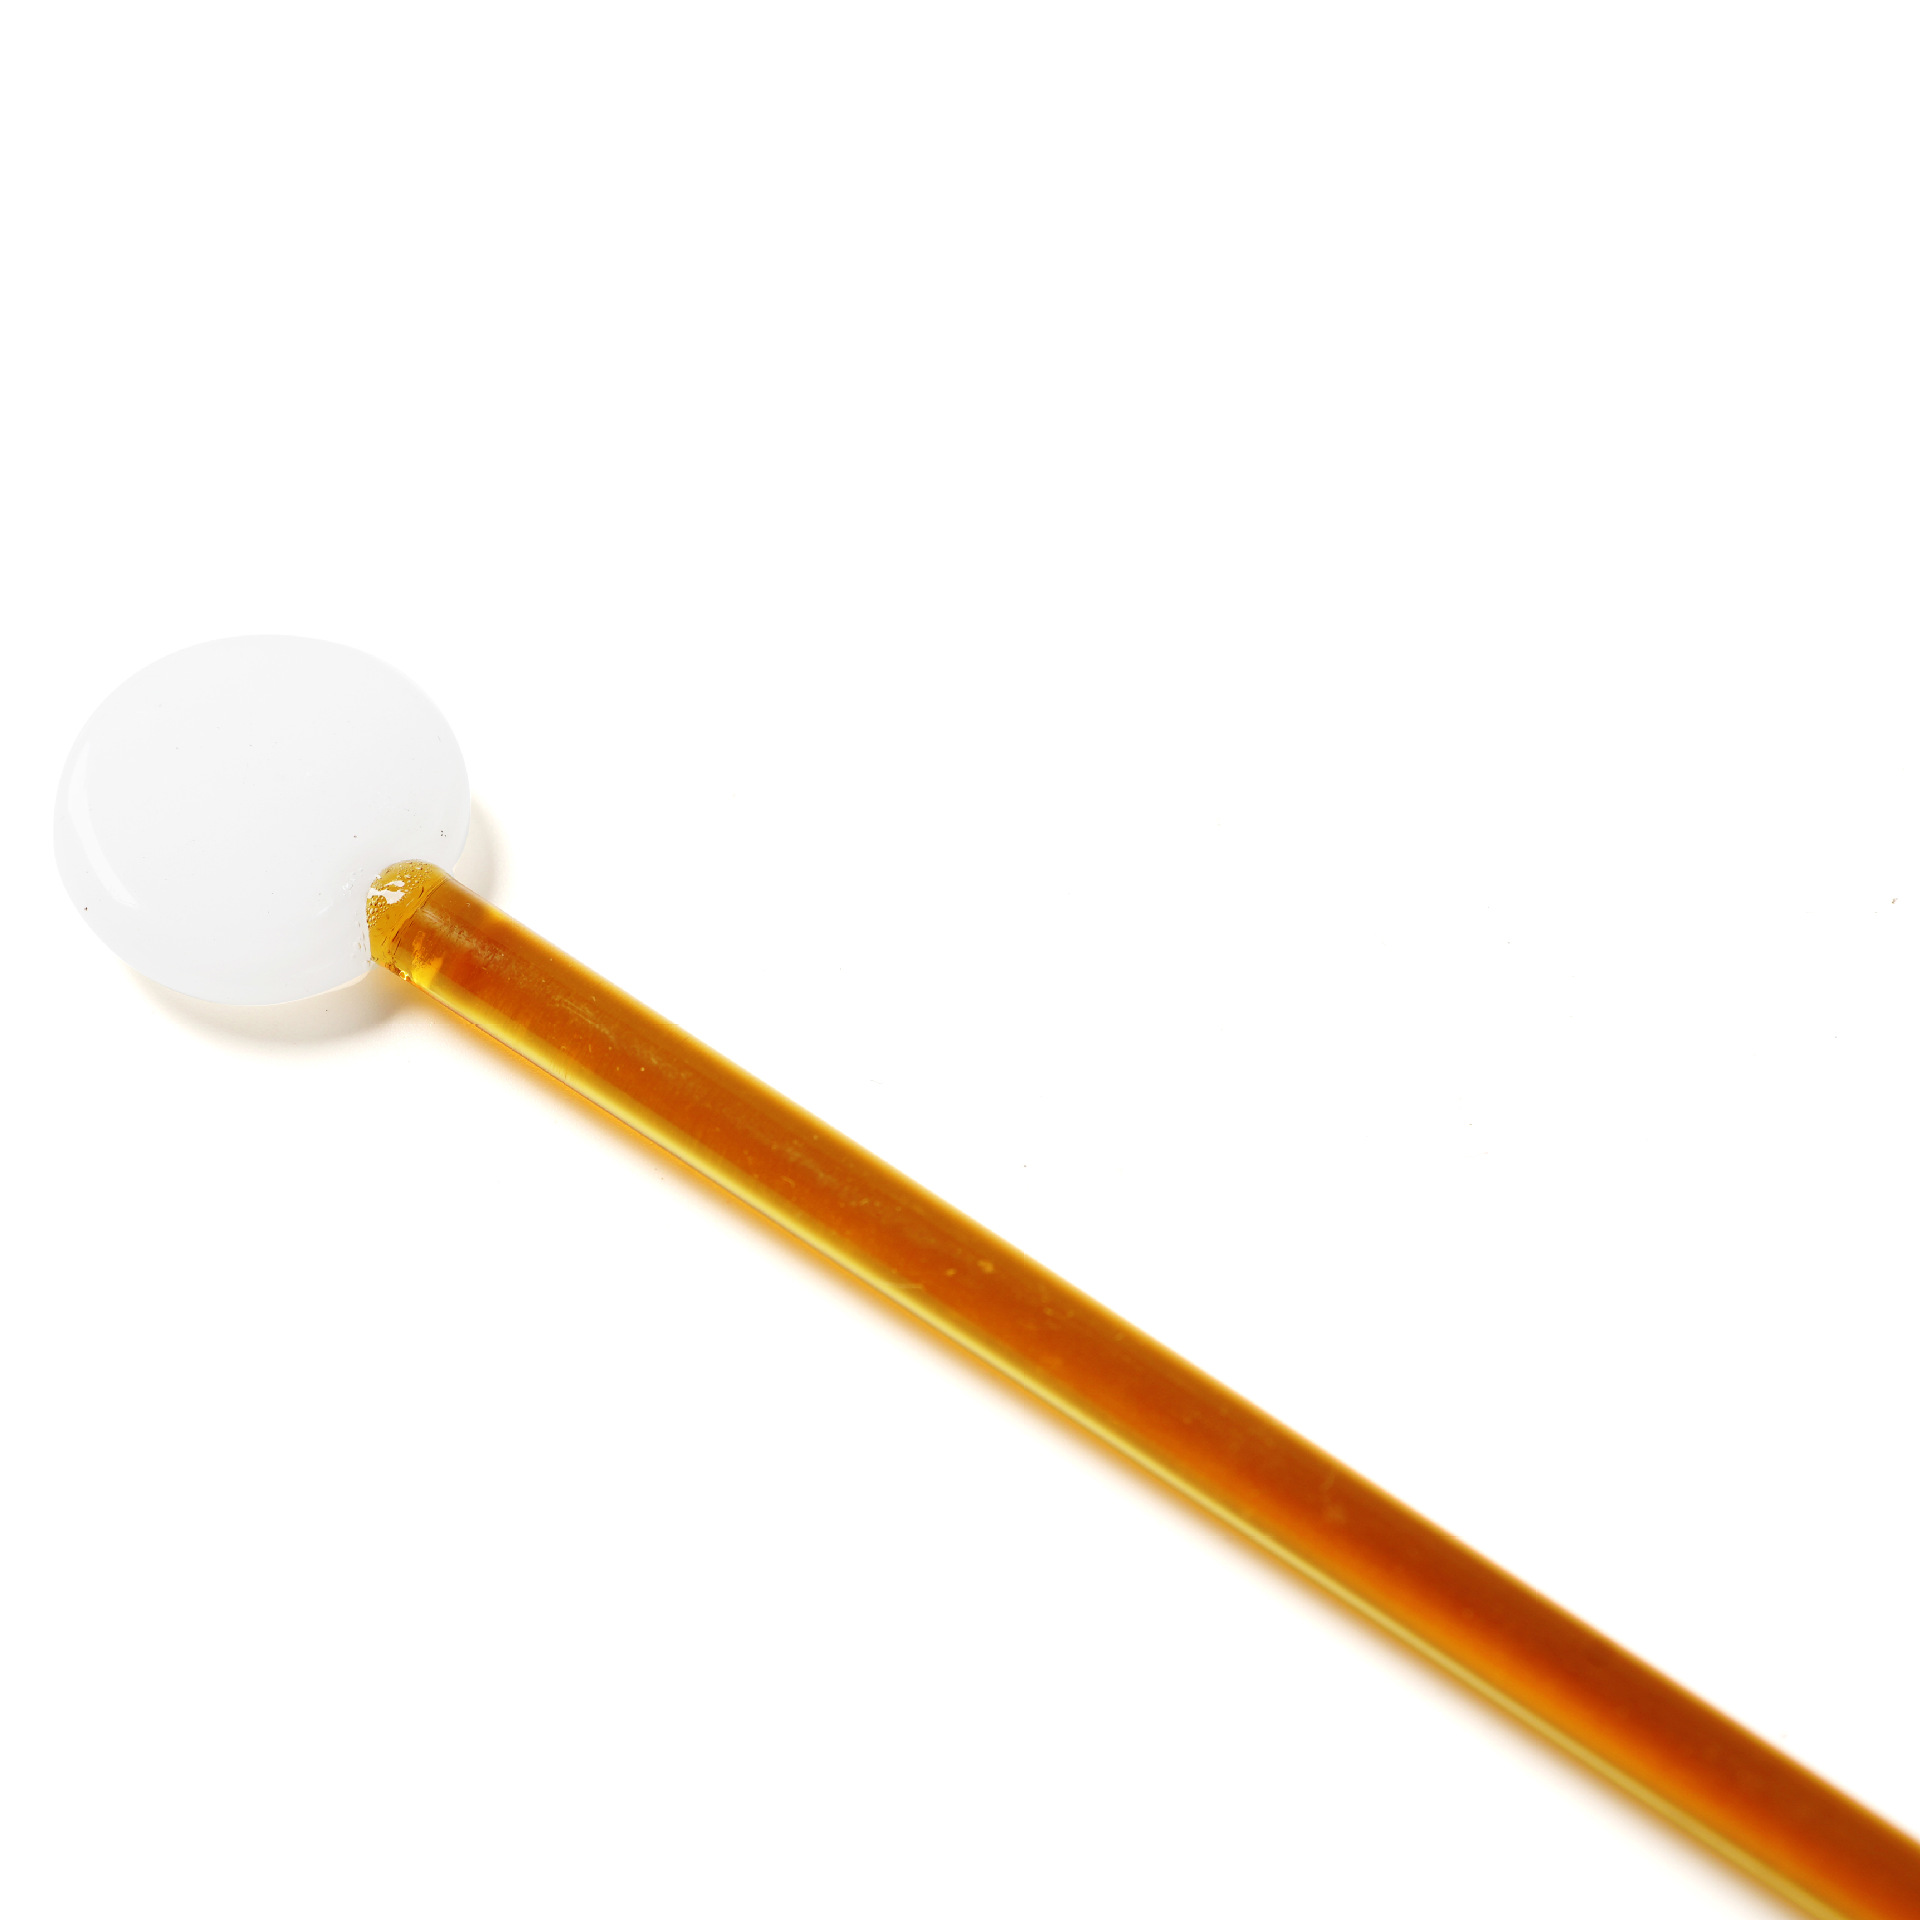 Lollipop cocktail stirring rod white and amber